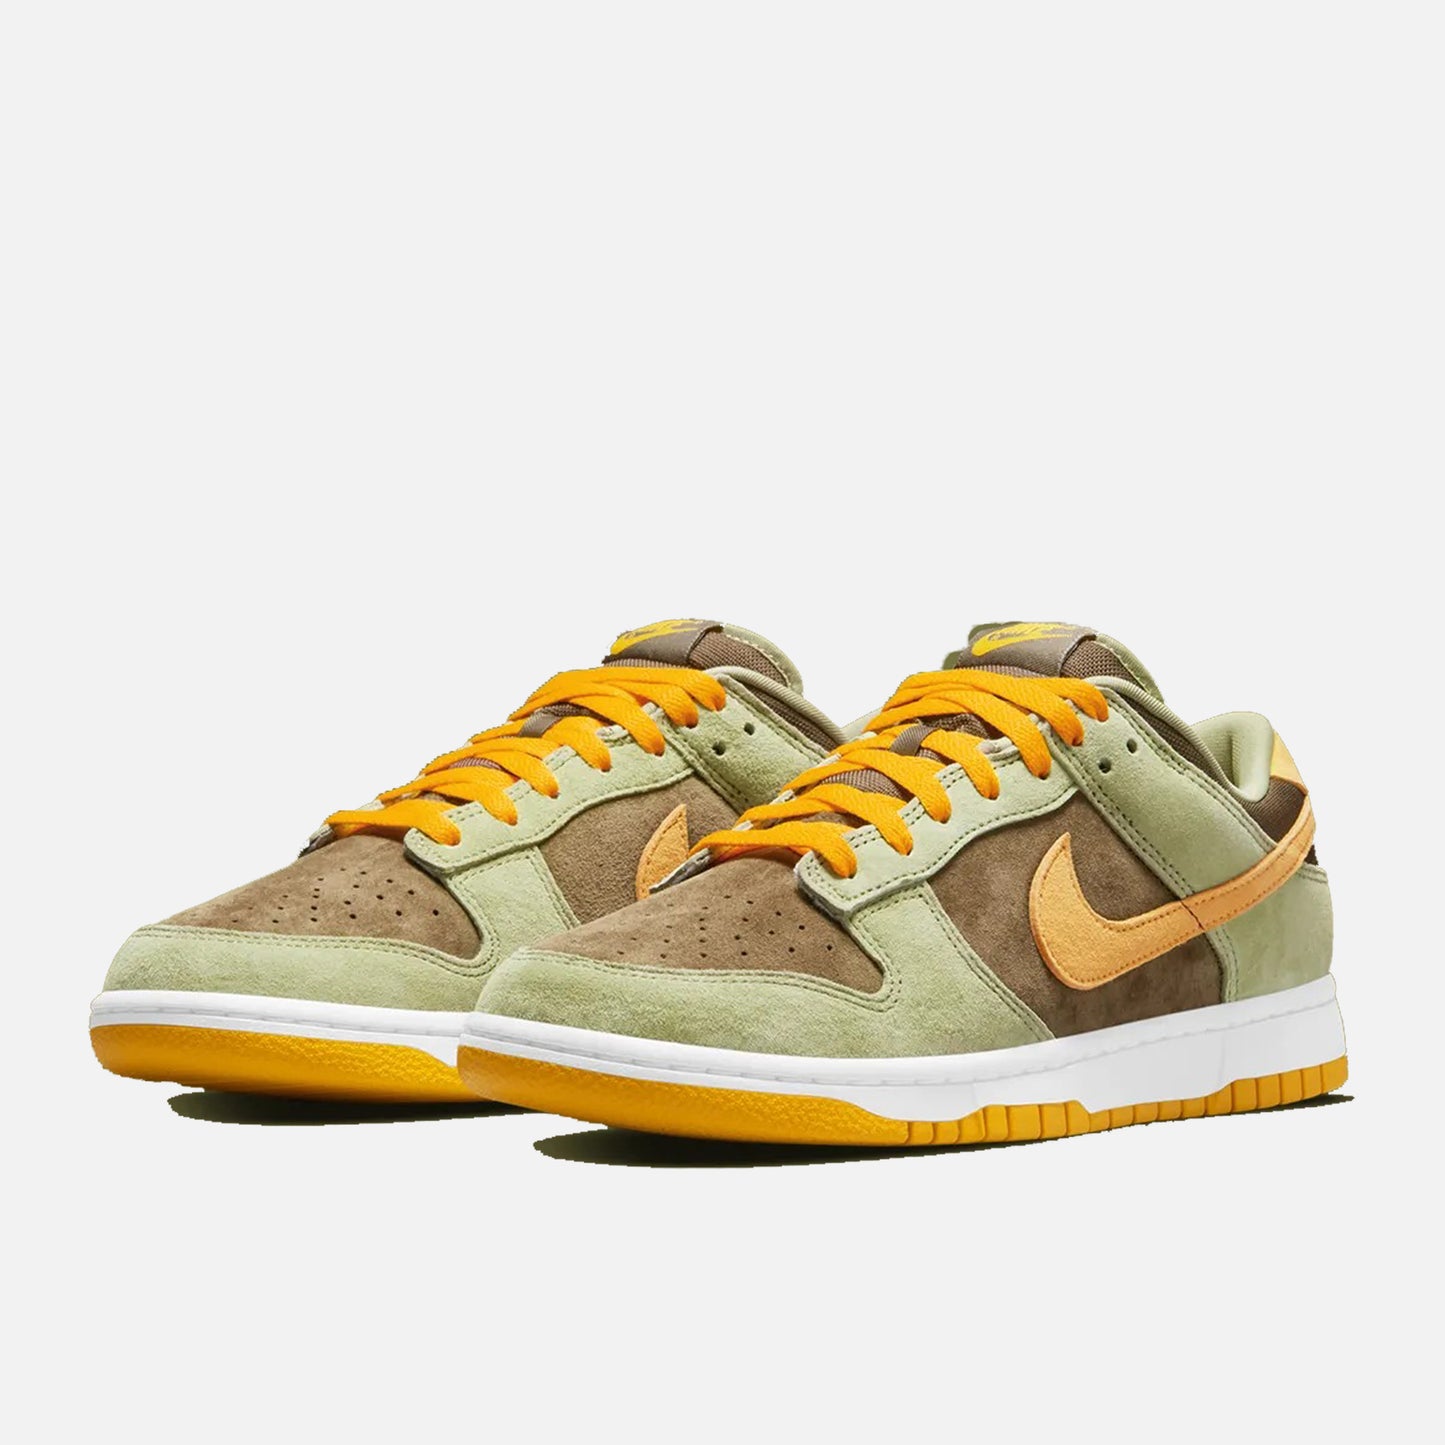 NIKE DUNK LOW DUSTY OLIVE GOLD